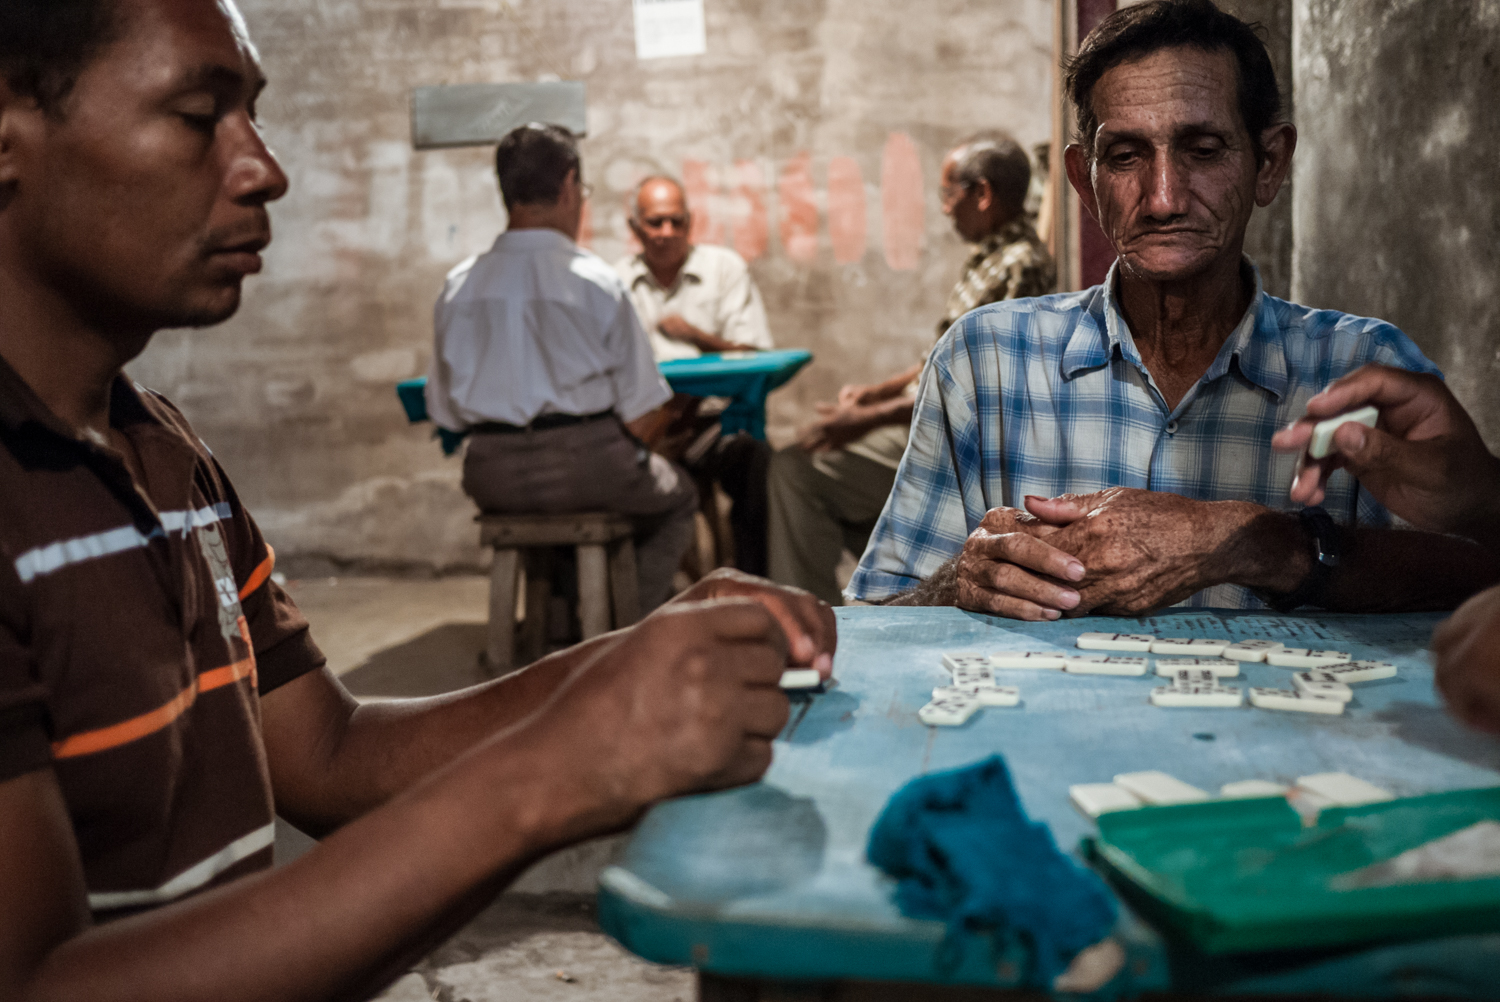 Billares de Rueda. Men playing domino in one of the billares in town. Loud vallenato music records are always played in the background.